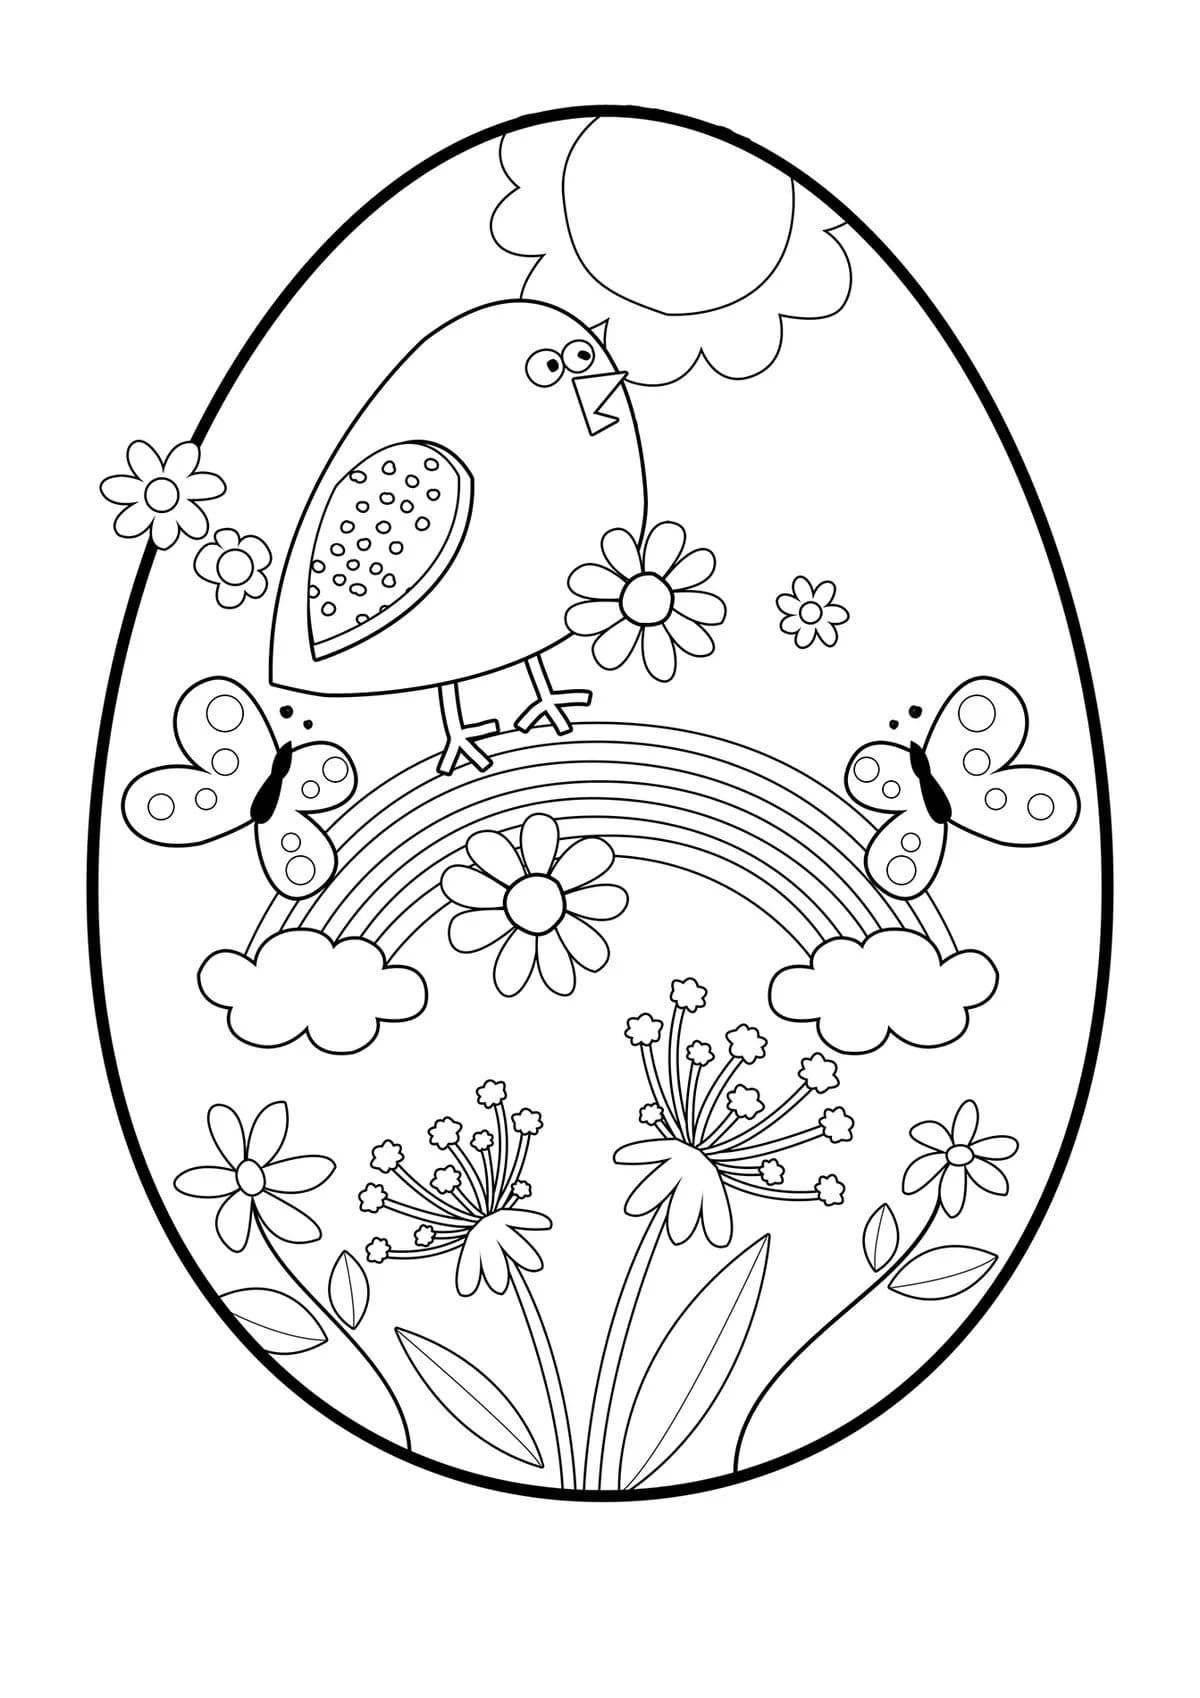 Creative Easter egg coloring